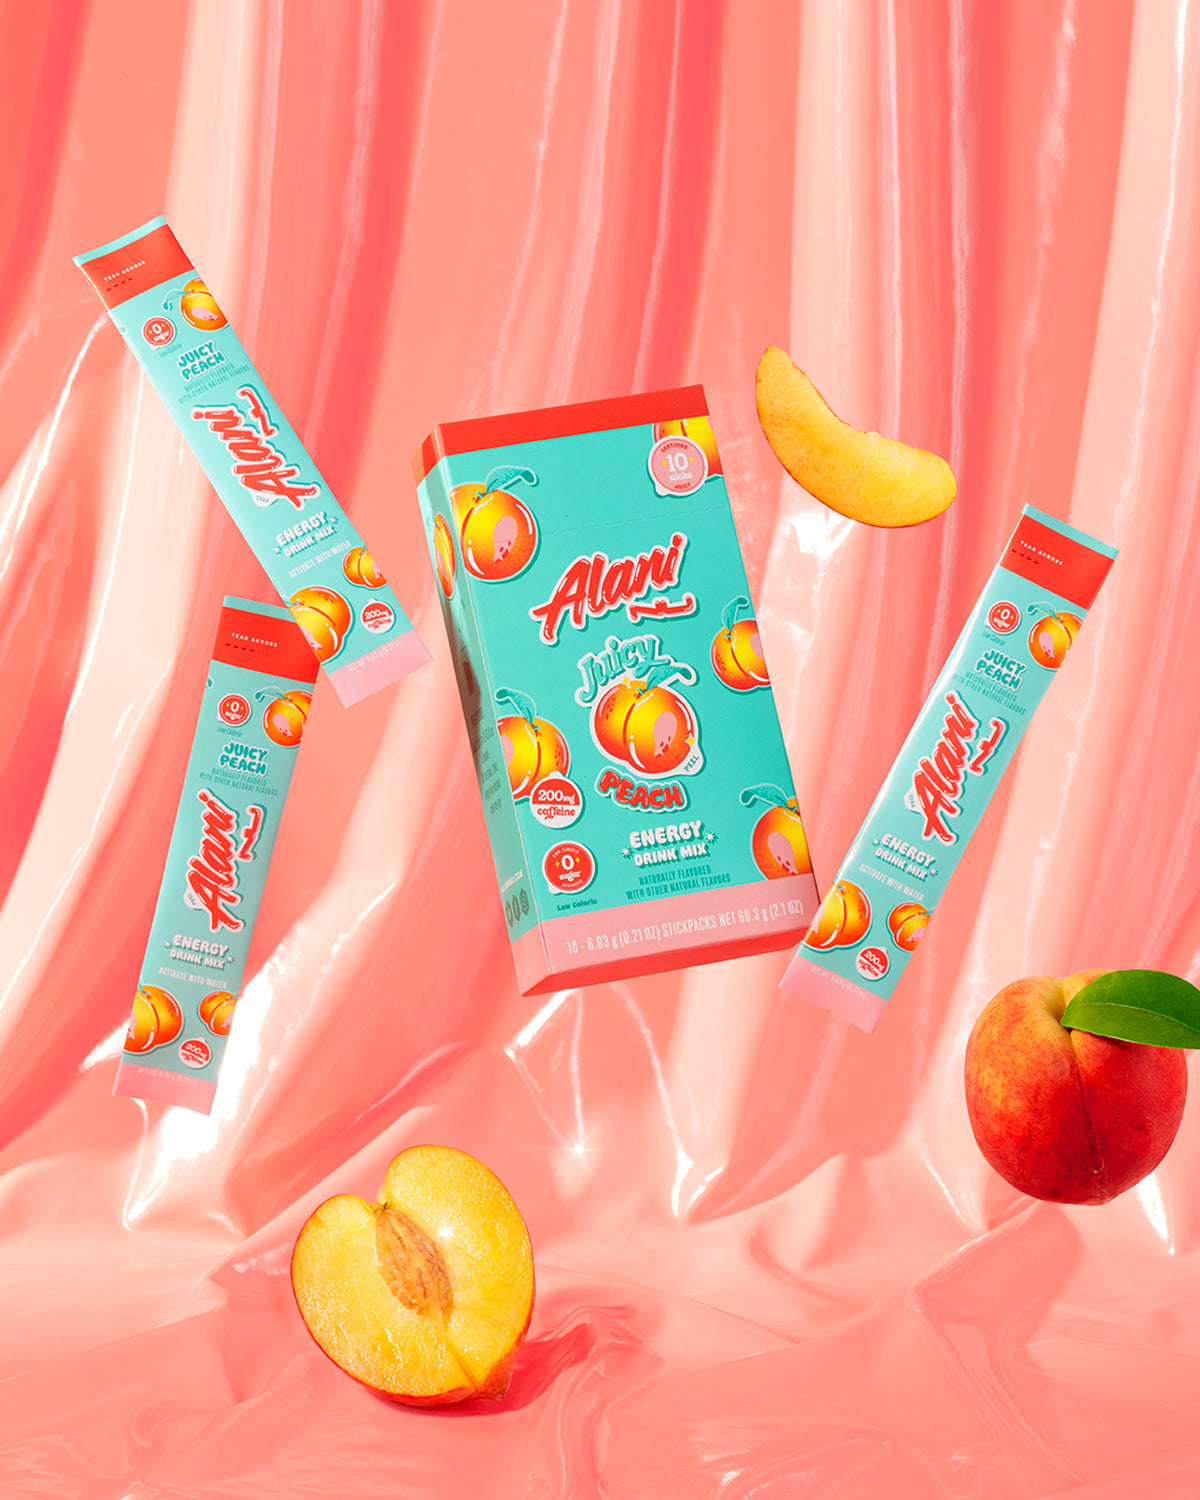 A variety of Peaches next to Energy Sticks in Juicy Peach sticks.